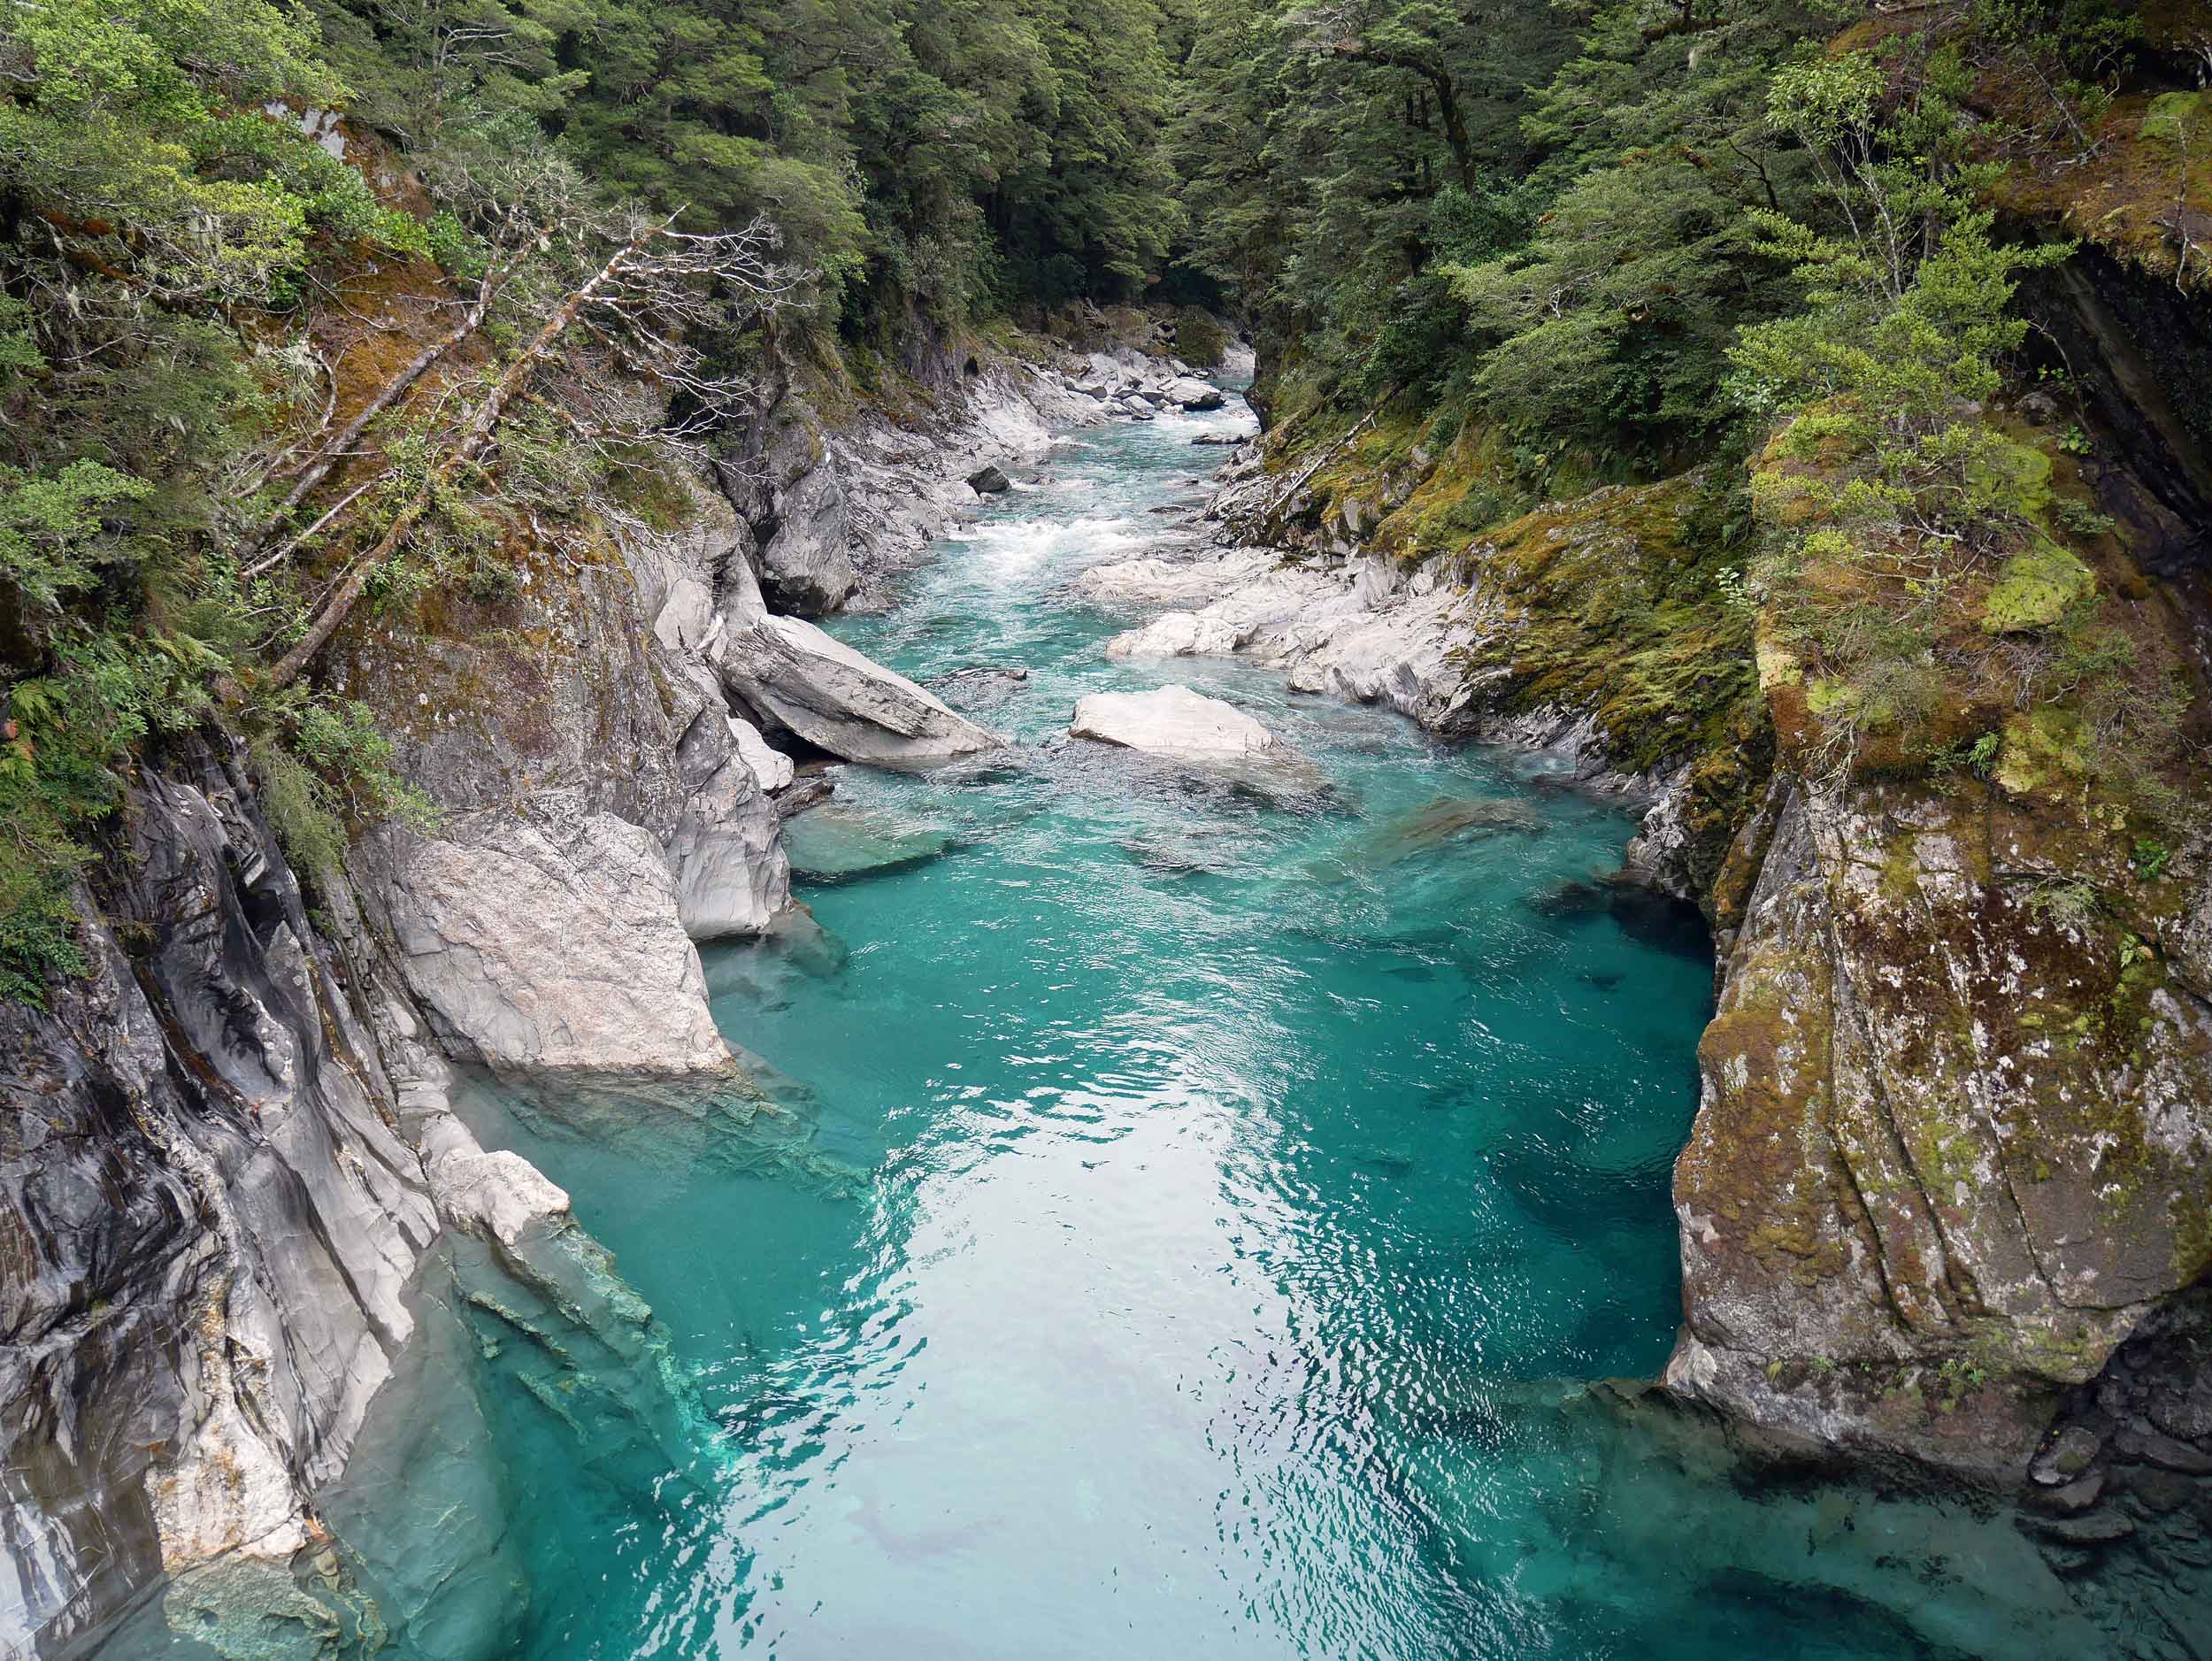  We also took a short walk across another swing bridge to take in the crystal Blue Pools of the Makaroa River (Jan 7).&nbsp; 